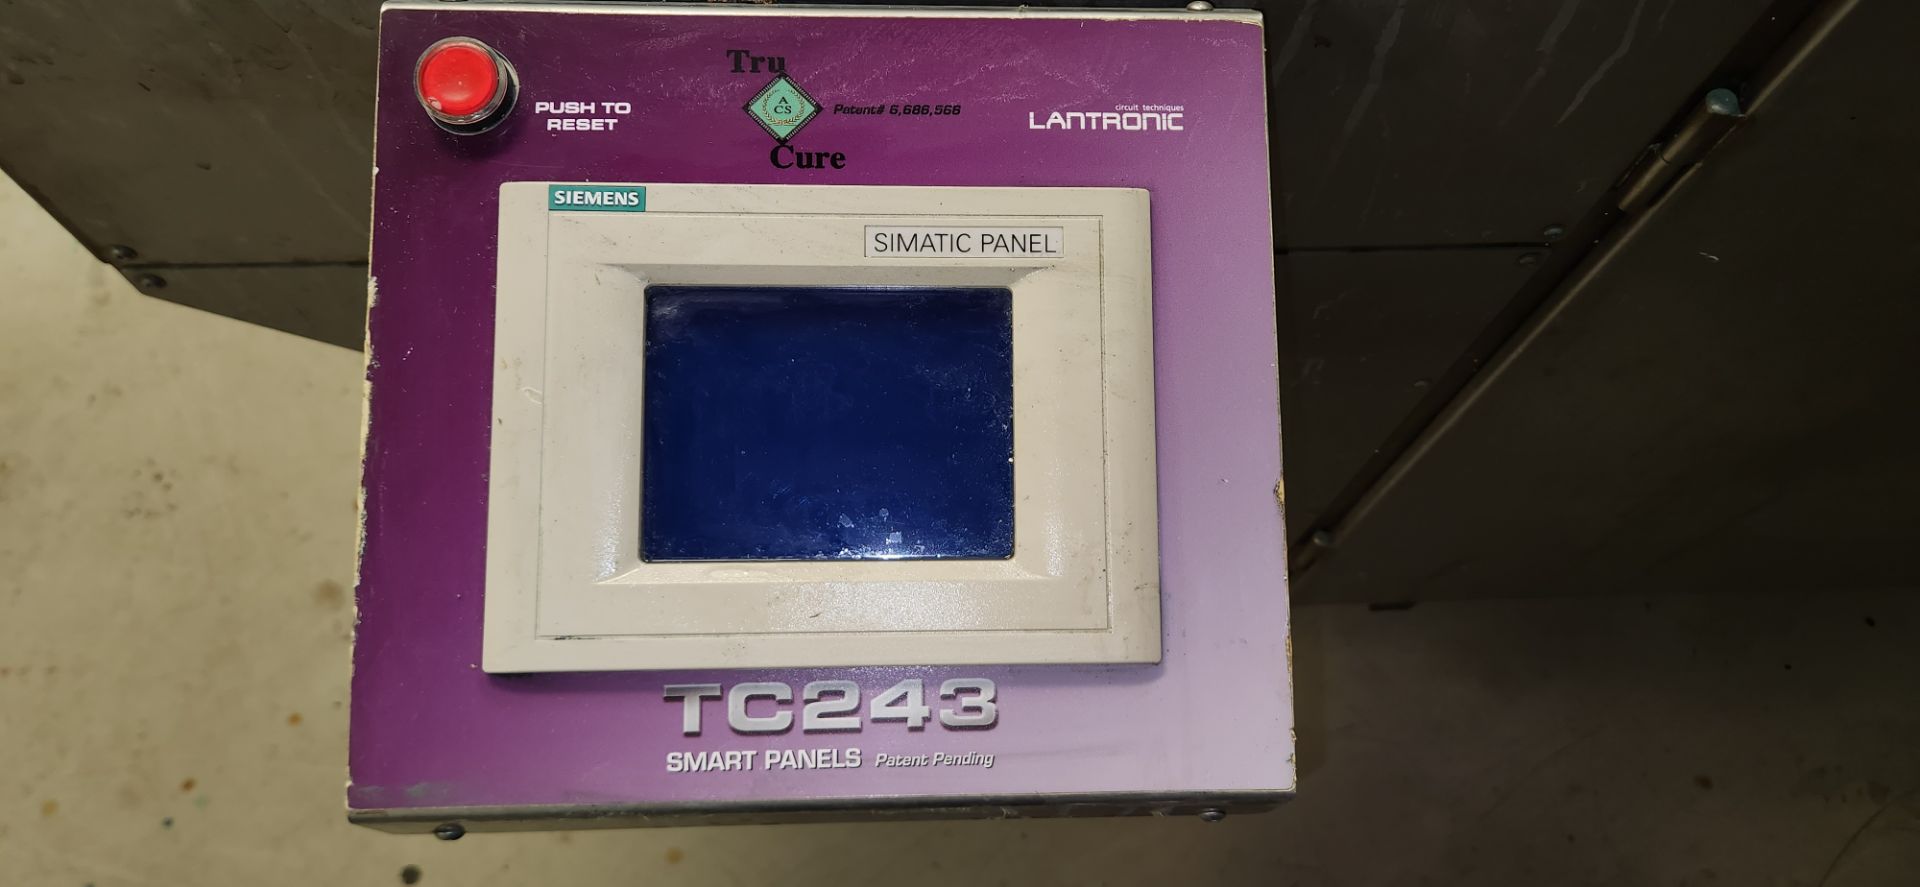 2006 LANTRONIC MODEL TC243 CURING OVEN W/ SIEMENS QUICK PANEL JR. TOUCH SCREEN CONTROL - Image 16 of 16